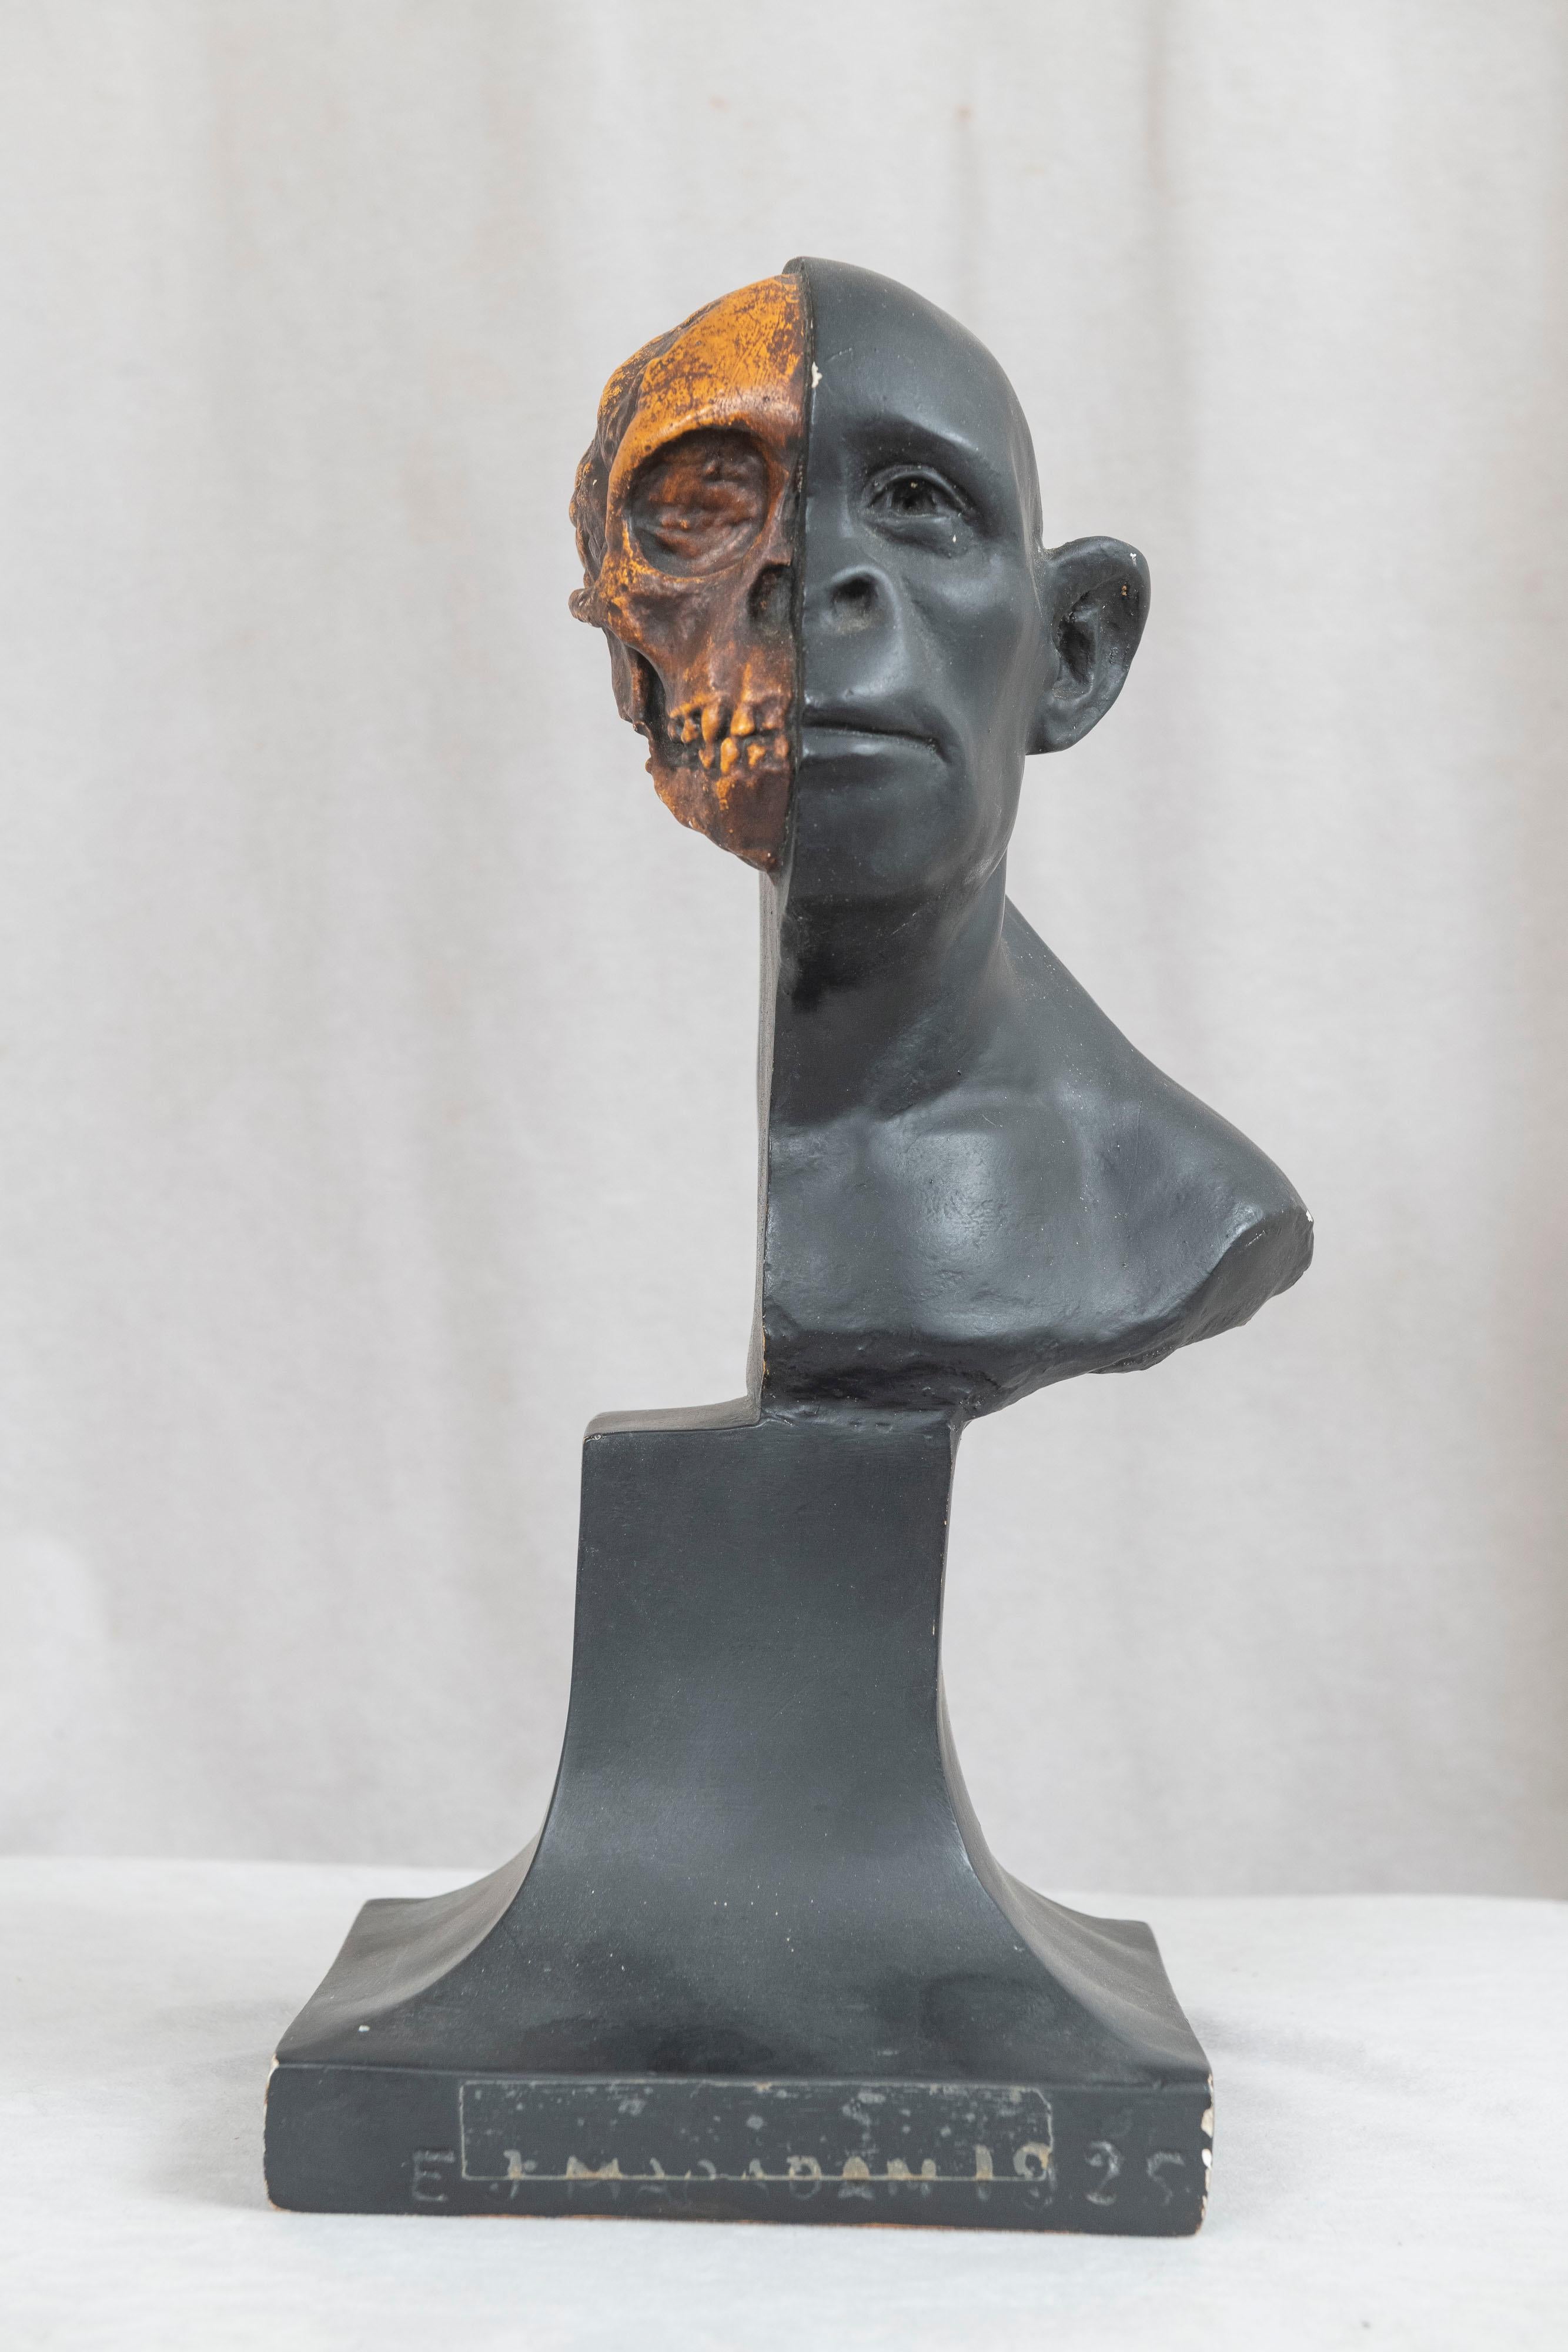 We are offering a unique opportunity to own 2 sculptures that came from the University of Philadelphia Museum. The anthropologic study of man sculpture is artist signed Elizabeth Jane Macadam. We have her information if you wish to learn about her.